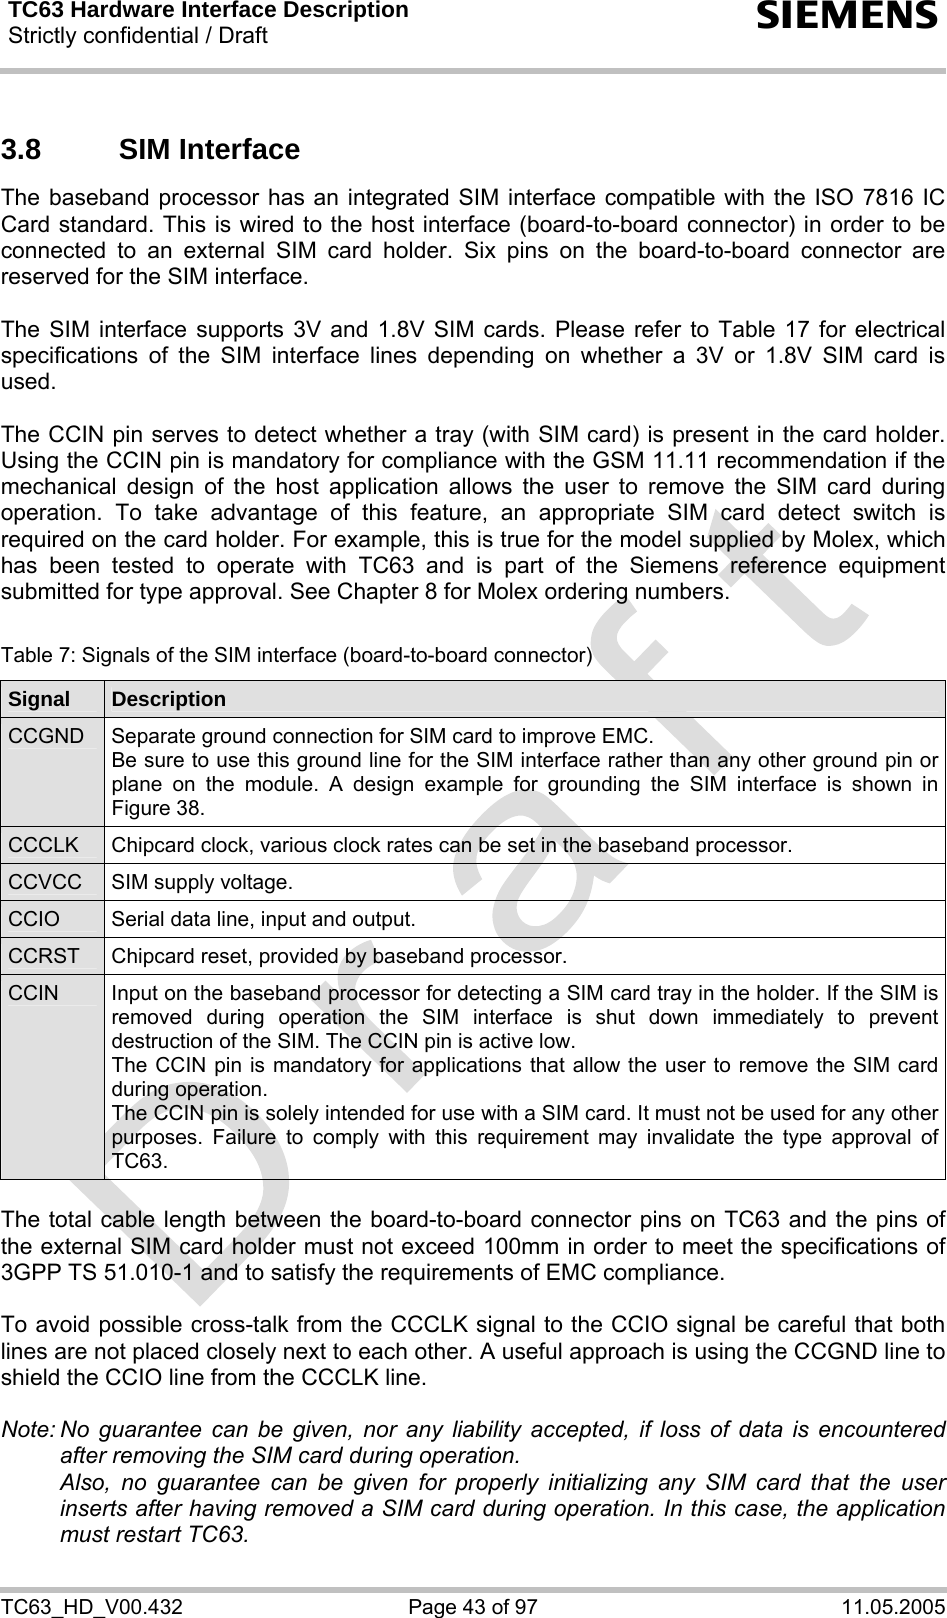 TC63 Hardware Interface Description Strictly confidential / Draft  s TC63_HD_V00.432  Page 43 of 97  11.05.2005 3.8 SIM Interface The baseband processor has an integrated SIM interface compatible with the ISO 7816 IC Card standard. This is wired to the host interface (board-to-board connector) in order to be connected to an external SIM card holder. Six pins on the board-to-board connector are reserved for the SIM interface.   The SIM interface supports 3V and 1.8V SIM cards. Please refer to Table 17 for electrical specifications of the SIM interface lines depending on whether a 3V or 1.8V SIM card is used.  The CCIN pin serves to detect whether a tray (with SIM card) is present in the card holder. Using the CCIN pin is mandatory for compliance with the GSM 11.11 recommendation if the mechanical design of the host application allows the user to remove the SIM card during operation. To take advantage of this feature, an appropriate SIM card detect switch is required on the card holder. For example, this is true for the model supplied by Molex, which has been tested to operate with TC63 and is part of the Siemens reference equipment submitted for type approval. See Chapter 8 for Molex ordering numbers.  Table 7: Signals of the SIM interface (board-to-board connector) Signal  Description CCGND  Separate ground connection for SIM card to improve EMC.  Be sure to use this ground line for the SIM interface rather than any other ground pin or plane on the module. A design example for grounding the SIM interface is shown in Figure 38. CCCLK  Chipcard clock, various clock rates can be set in the baseband processor. CCVCC  SIM supply voltage. CCIO  Serial data line, input and output. CCRST  Chipcard reset, provided by baseband processor. CCIN  Input on the baseband processor for detecting a SIM card tray in the holder. If the SIM is removed during operation the SIM interface is shut down immediately to prevent destruction of the SIM. The CCIN pin is active low. The CCIN pin is mandatory for applications that allow the user to remove the SIM card during operation.  The CCIN pin is solely intended for use with a SIM card. It must not be used for any other purposes. Failure to comply with this requirement may invalidate the type approval of TC63.  The total cable length between the board-to-board connector pins on TC63 and the pins of the external SIM card holder must not exceed 100mm in order to meet the specifications of 3GPP TS 51.010-1 and to satisfy the requirements of EMC compliance.  To avoid possible cross-talk from the CCCLK signal to the CCIO signal be careful that both lines are not placed closely next to each other. A useful approach is using the CCGND line to shield the CCIO line from the CCCLK line.  Note: No guarantee can be given, nor any liability accepted, if loss of data is encountered after removing the SIM card during operation.    Also, no guarantee can be given for properly initializing any SIM card that the user inserts after having removed a SIM card during operation. In this case, the application must restart TC63. 